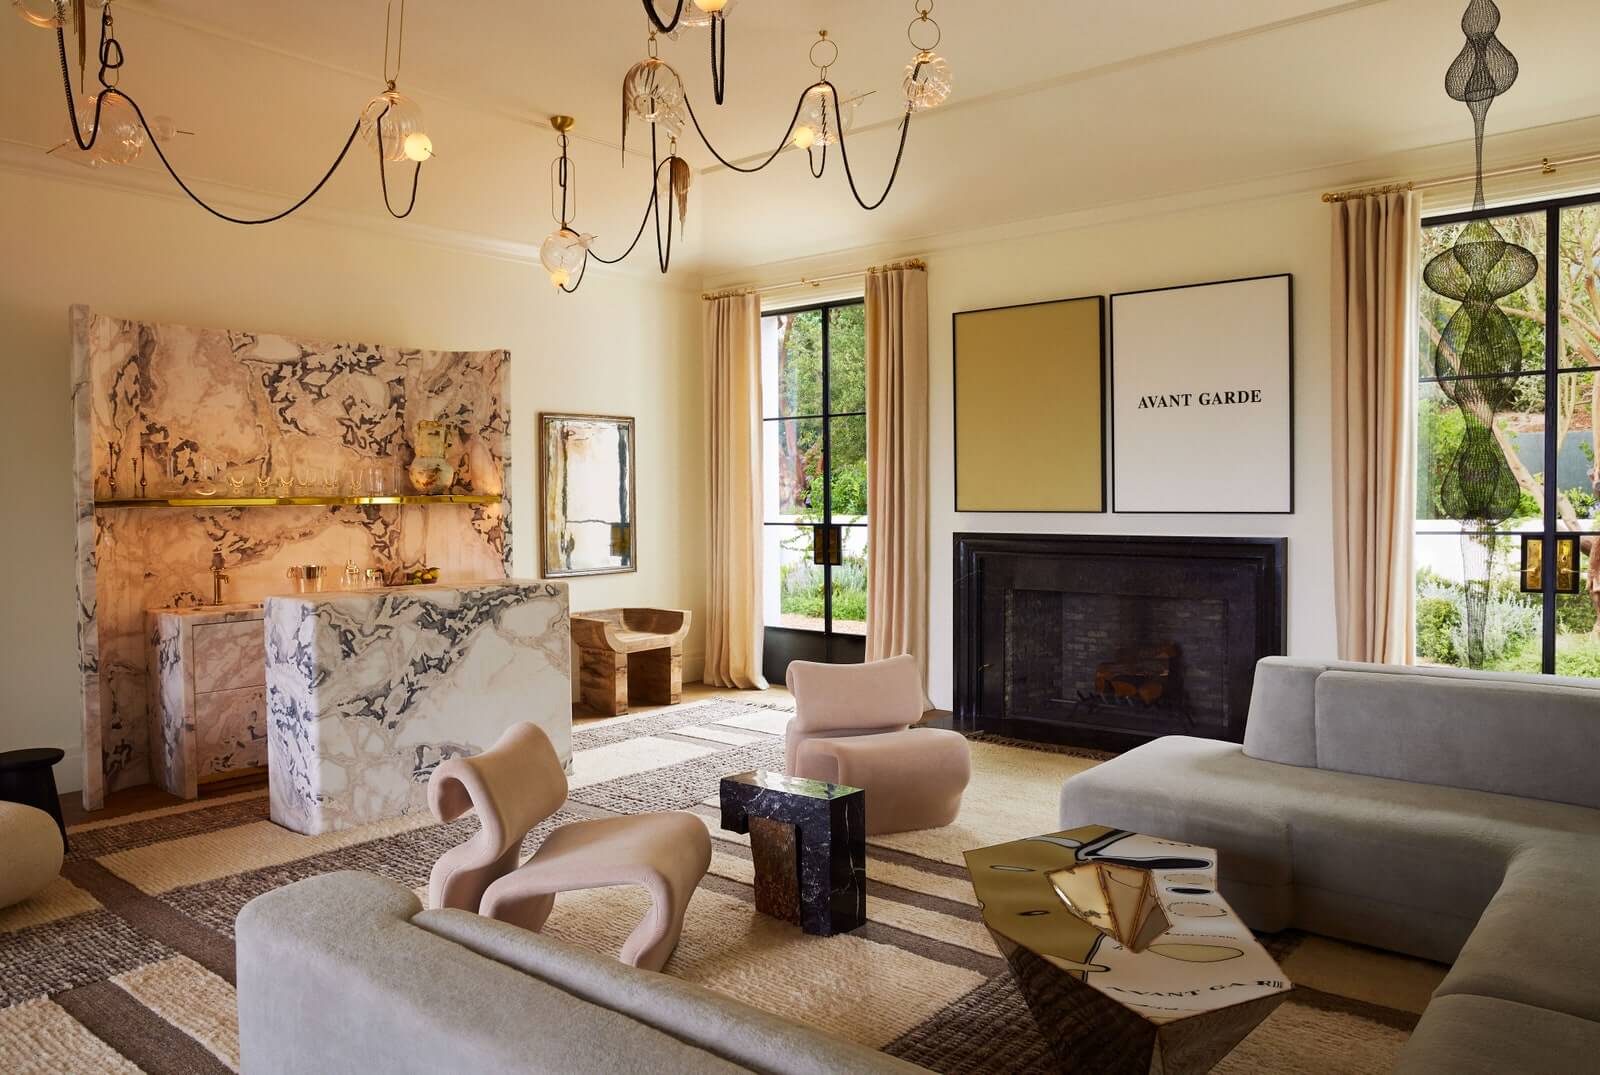 Gwyneth Paltrow's home with contemporary notes